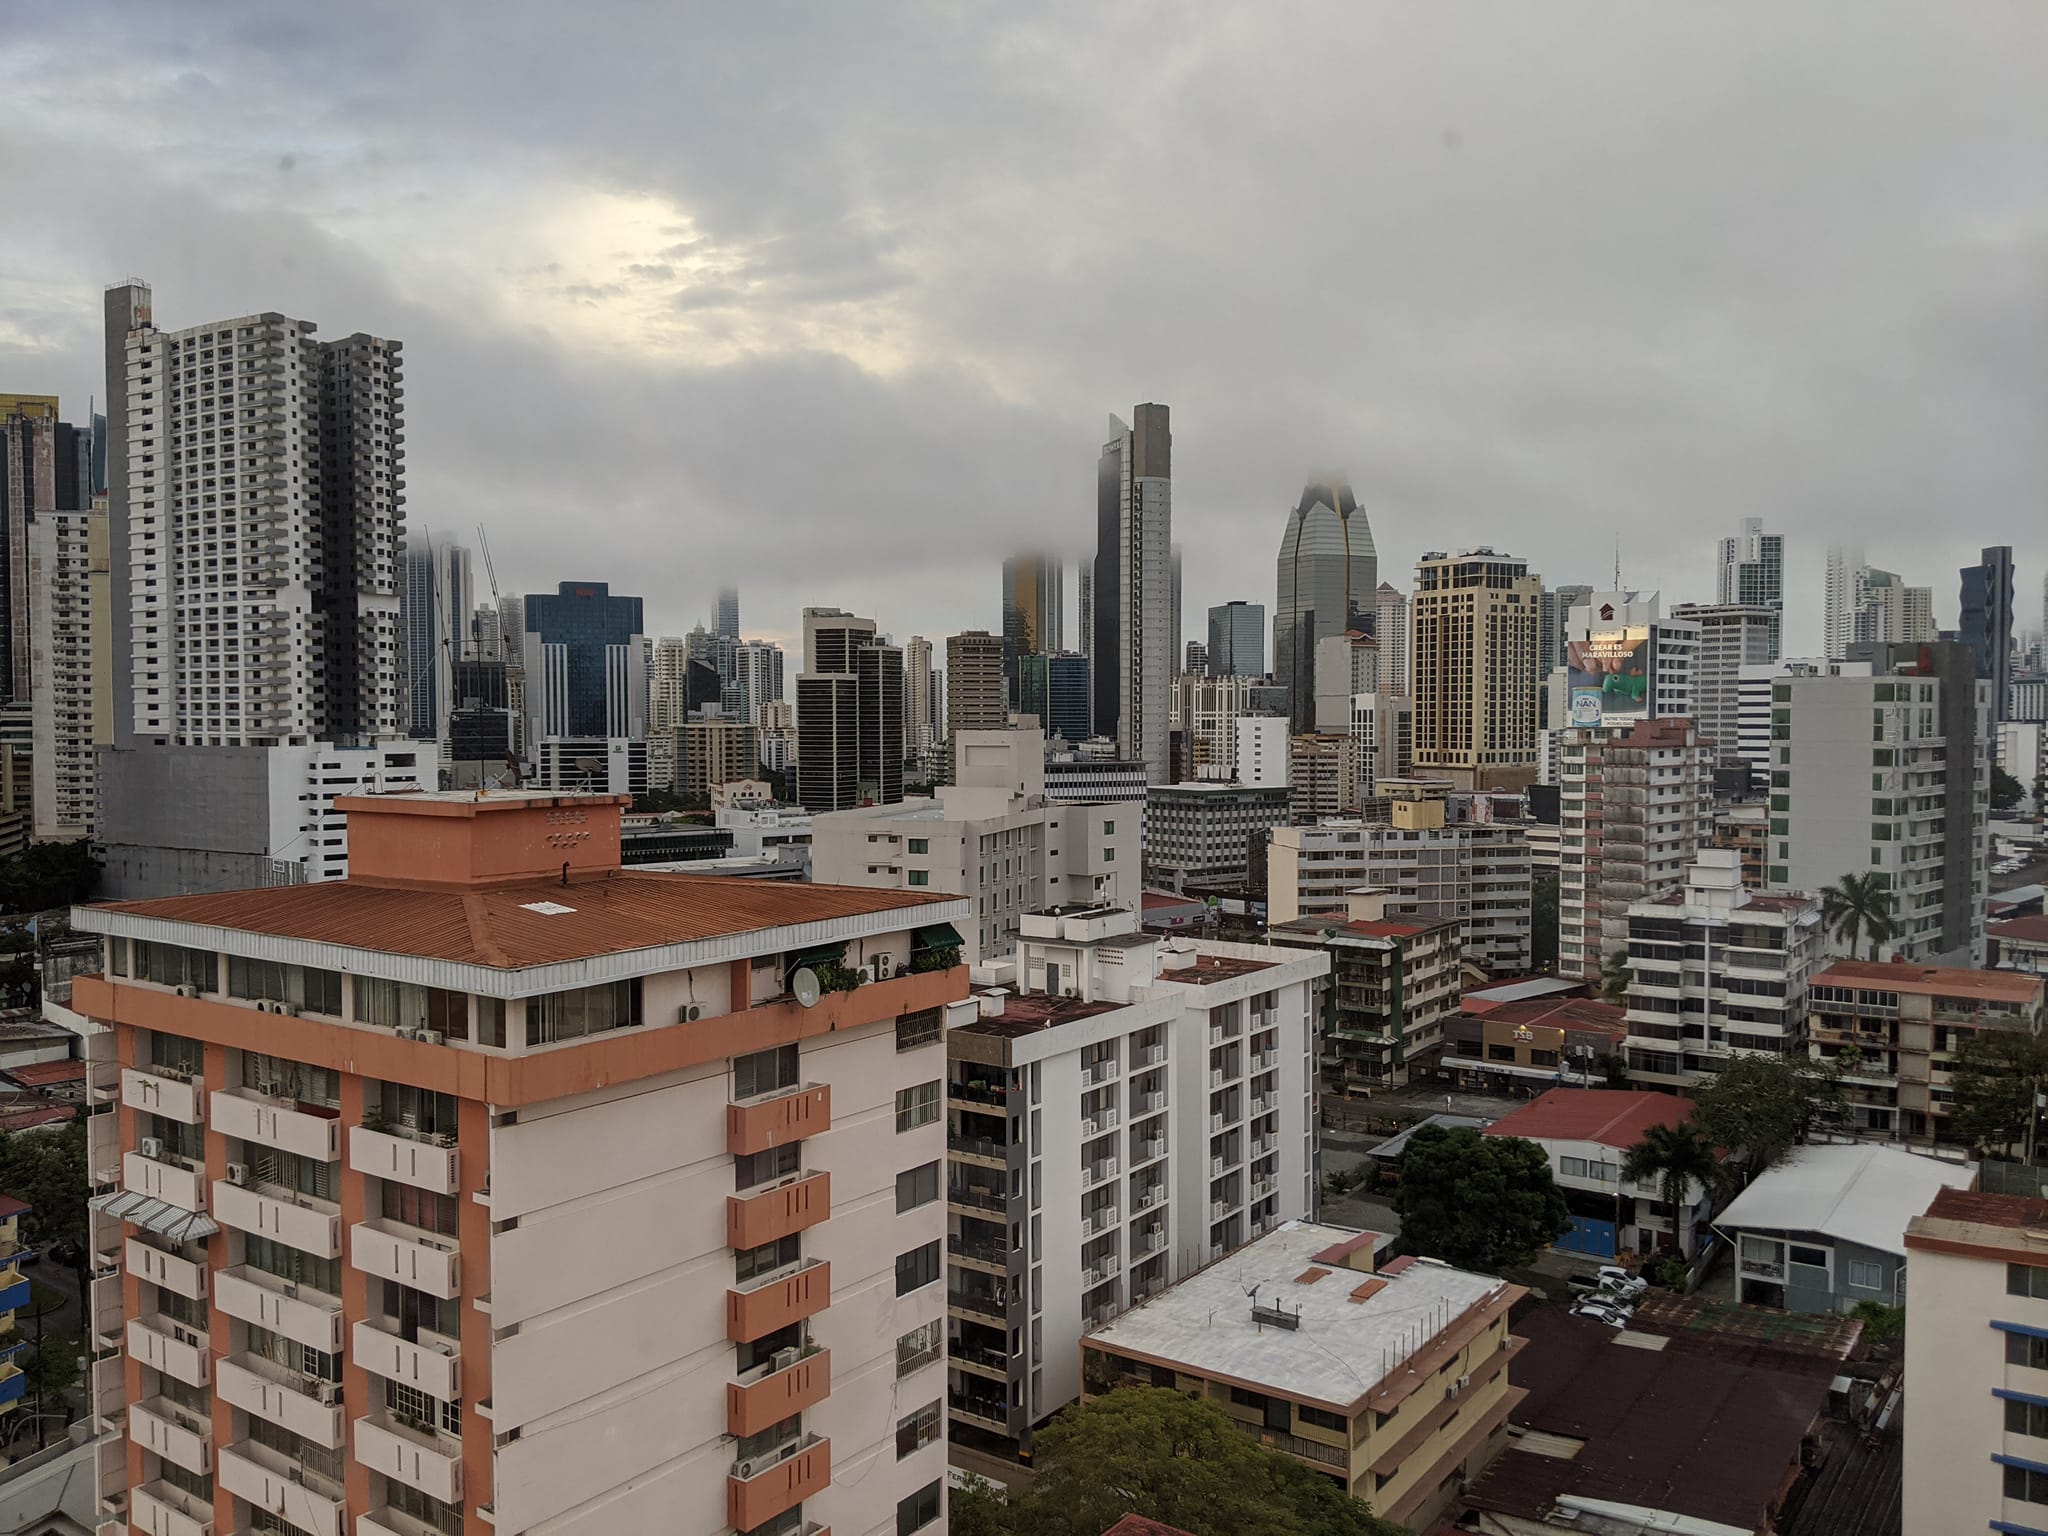 Panama City’s Success: A Product of Trade and Liberalization